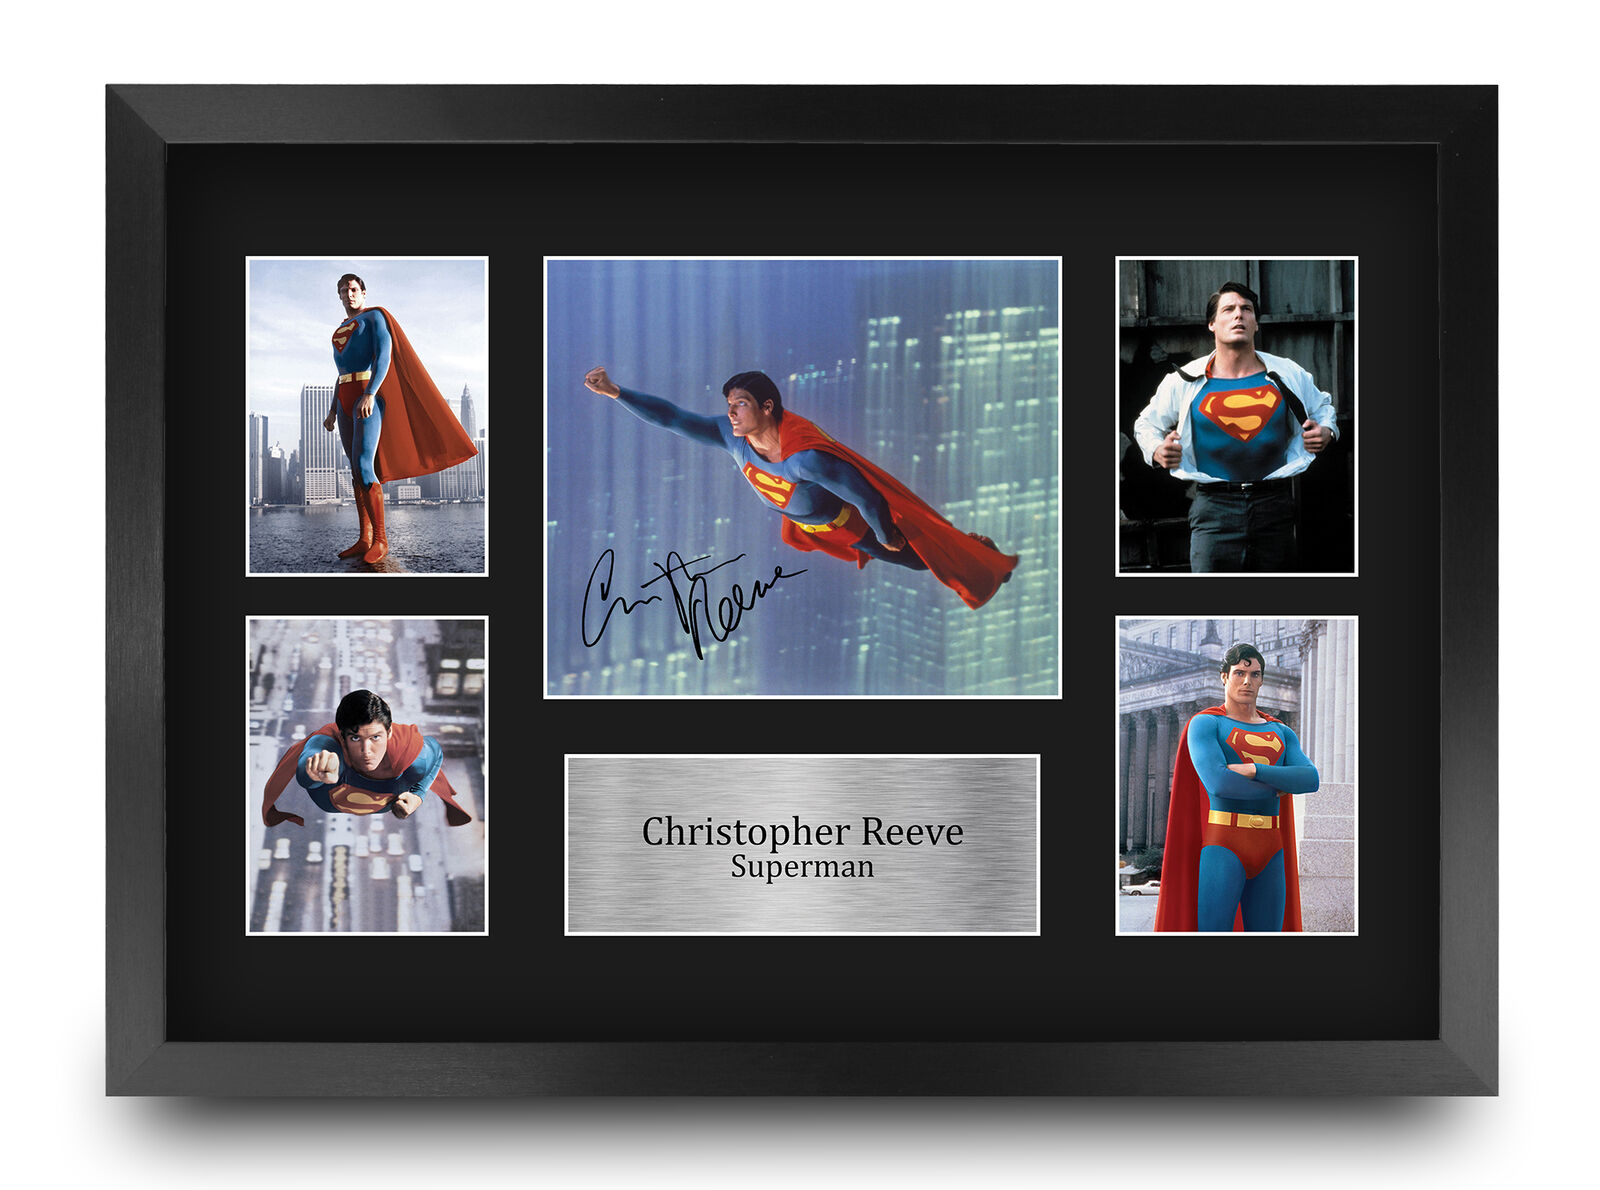 Christopher Reeve Superman Gift Framed Autograph Picture A3 Print to Movie Fans